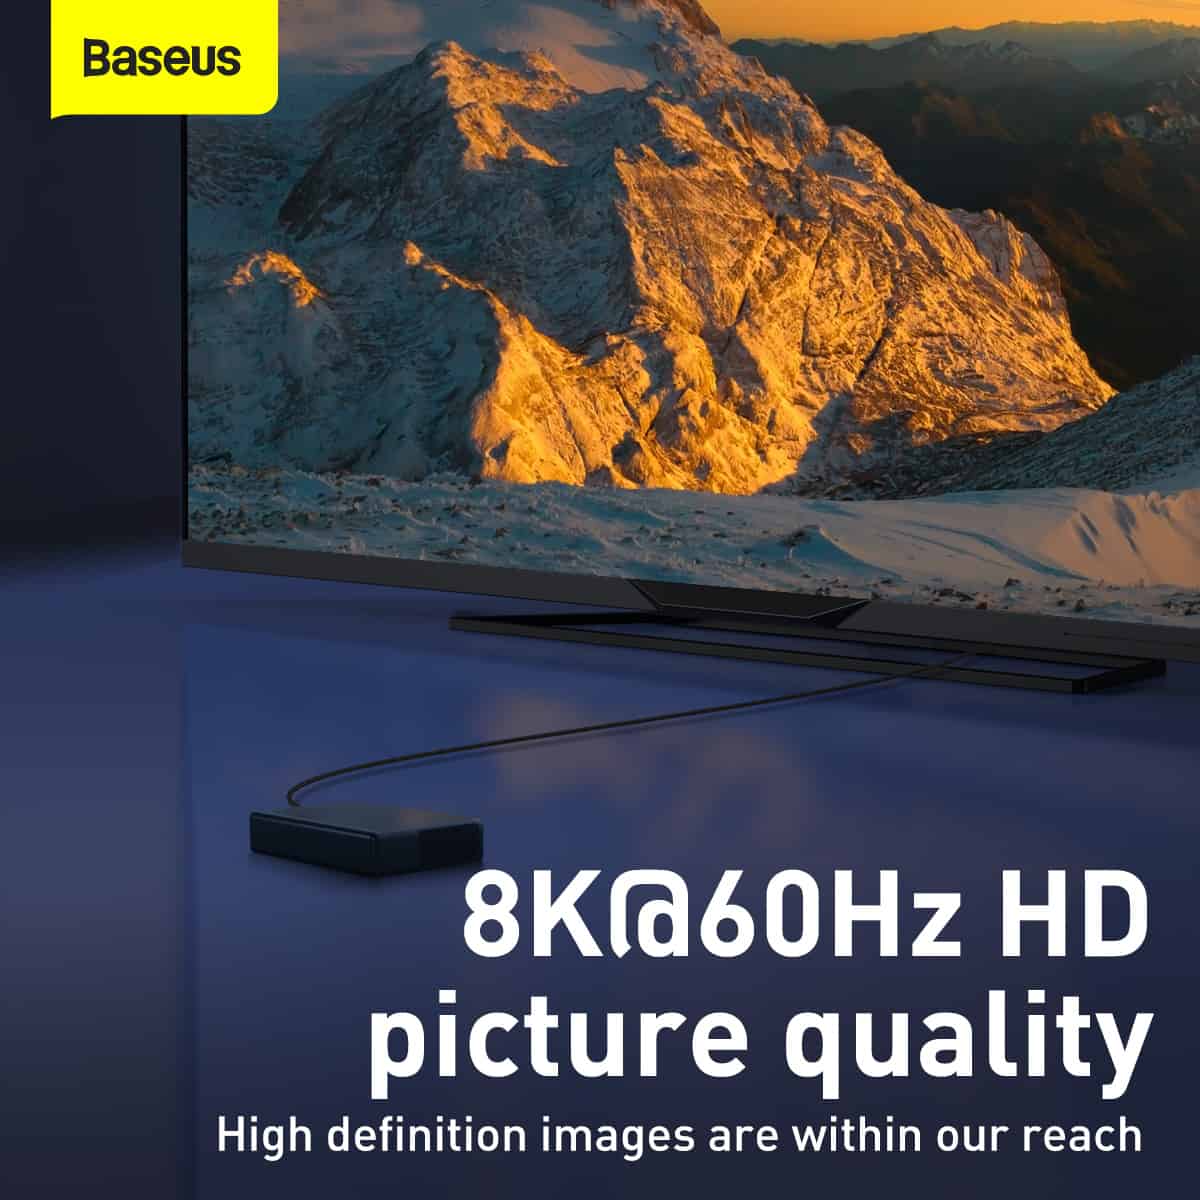 Baseus High Definition Series HDMI 8K to HDMI 8K Adapter Cable 5